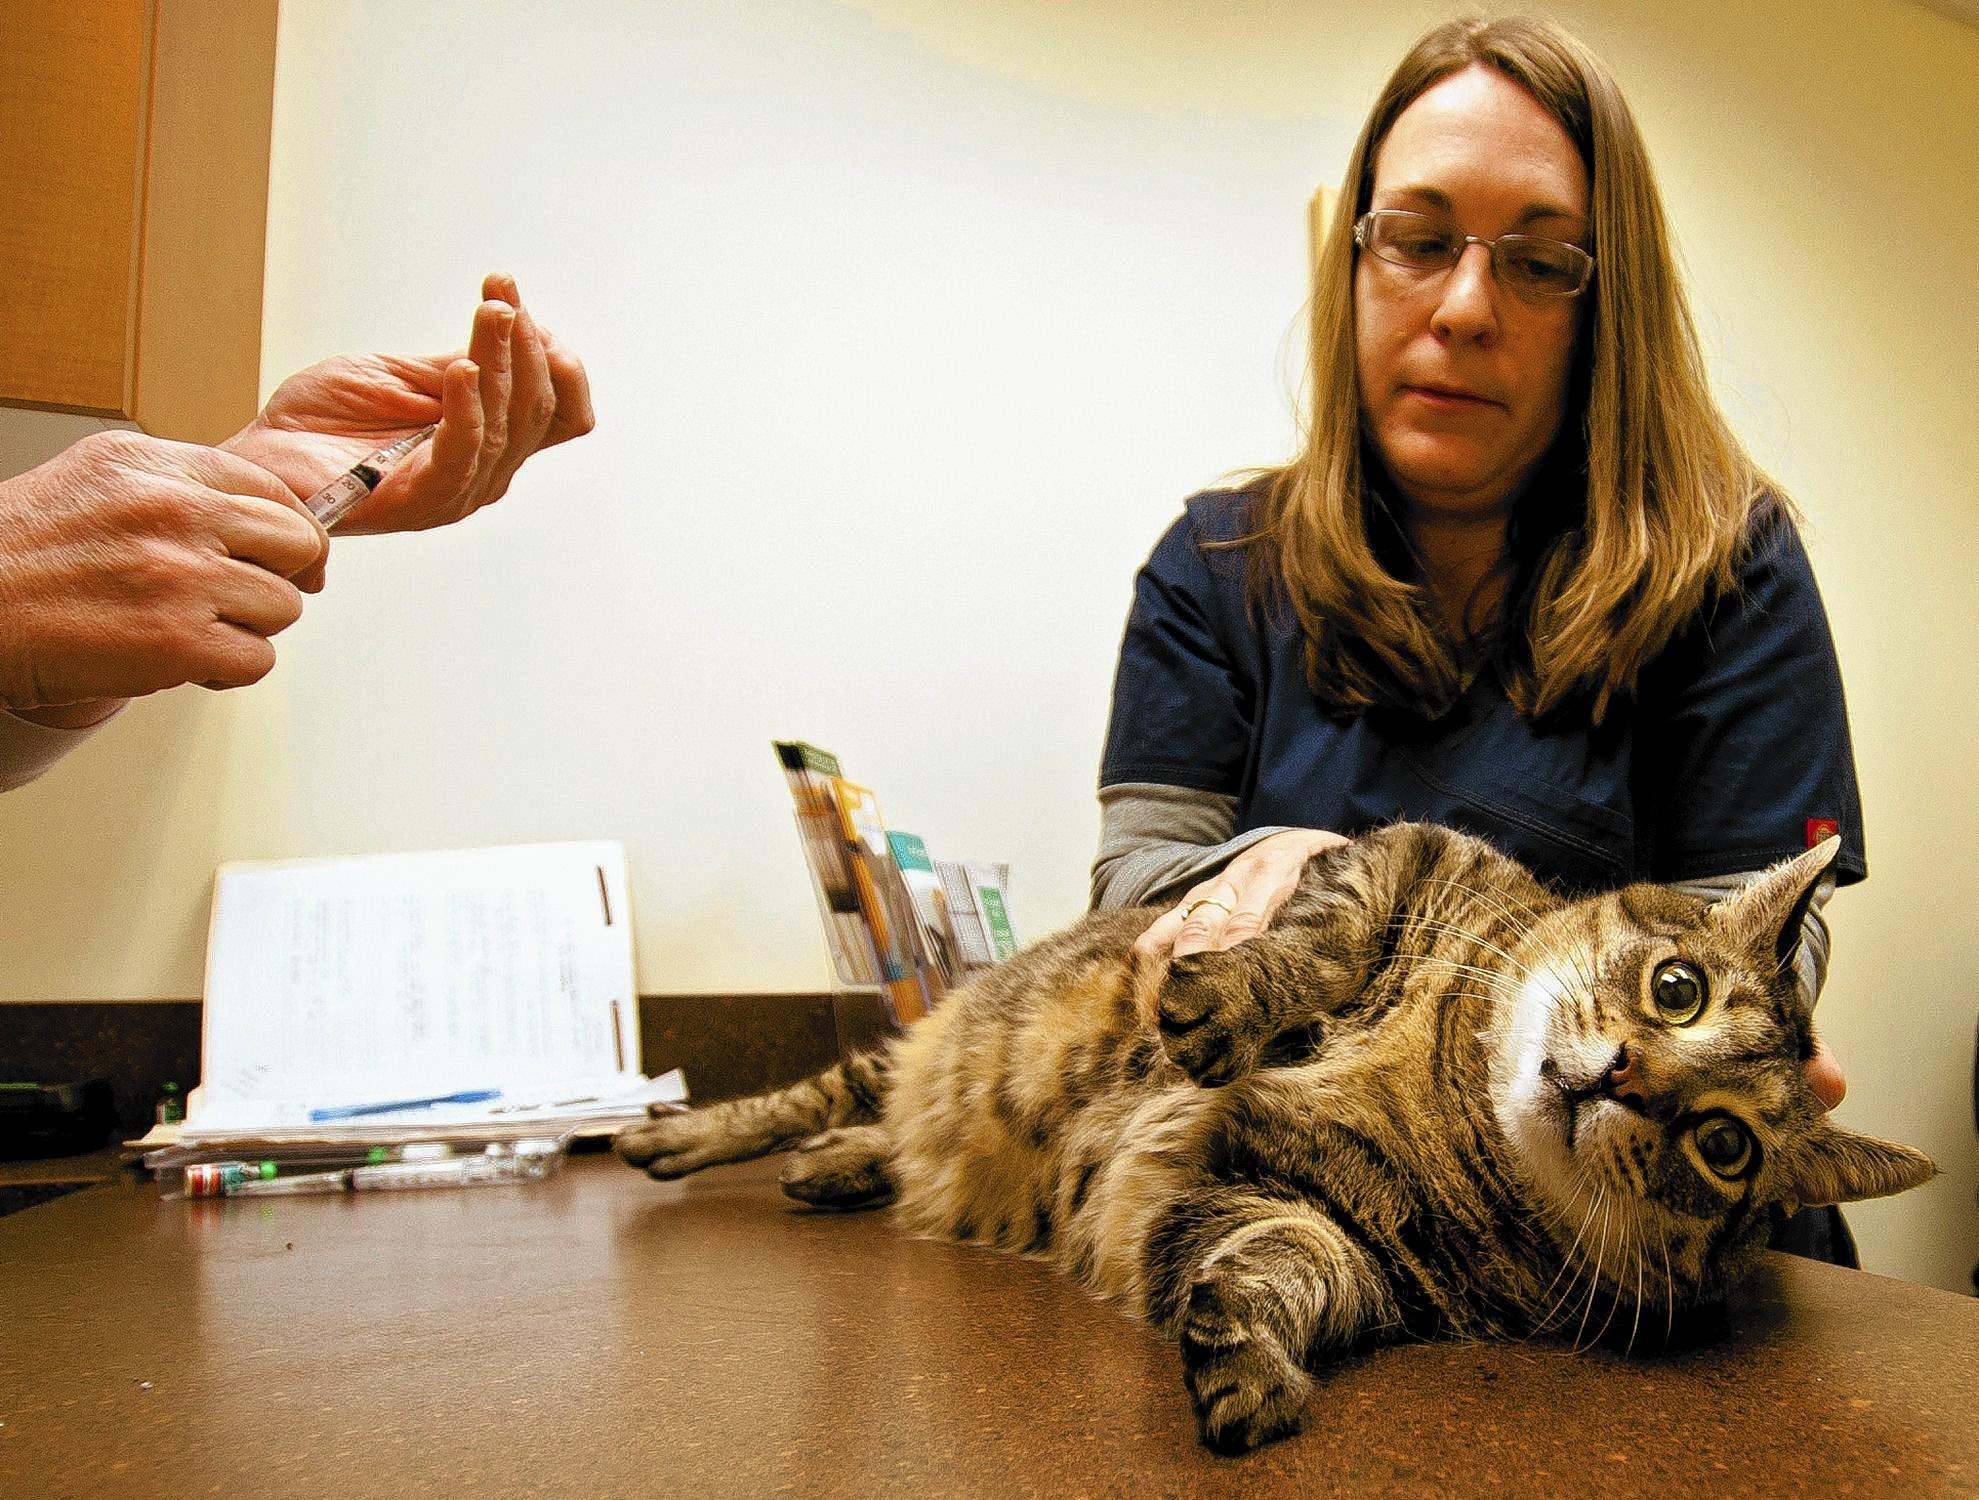 Cats aren't getting regular health care, Valley vets say